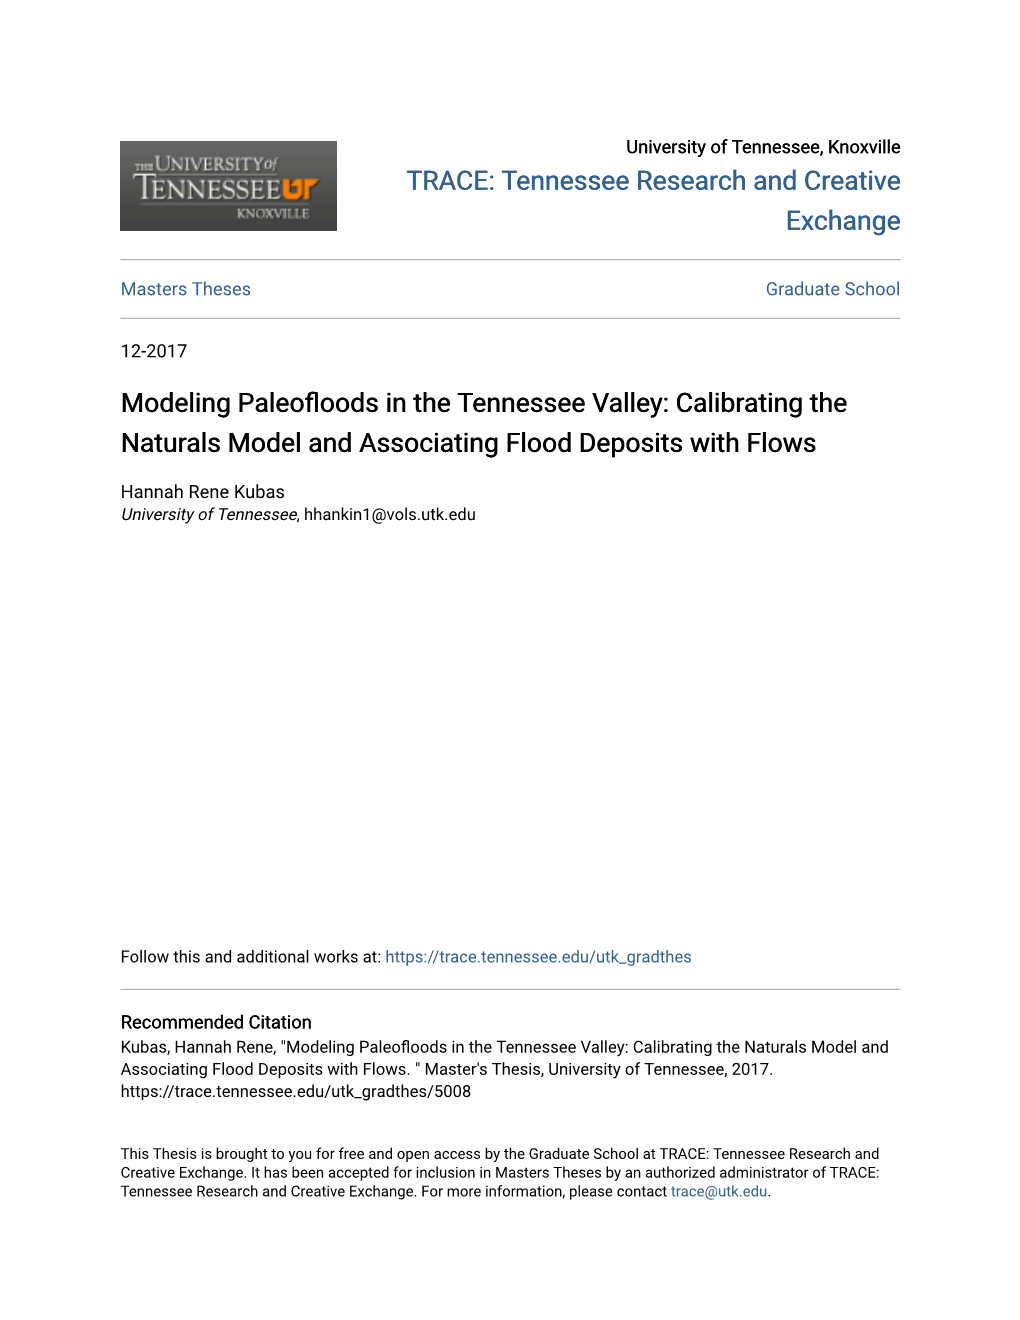 Modeling Paleofloods in the Tennessee Valley: Calibrating The